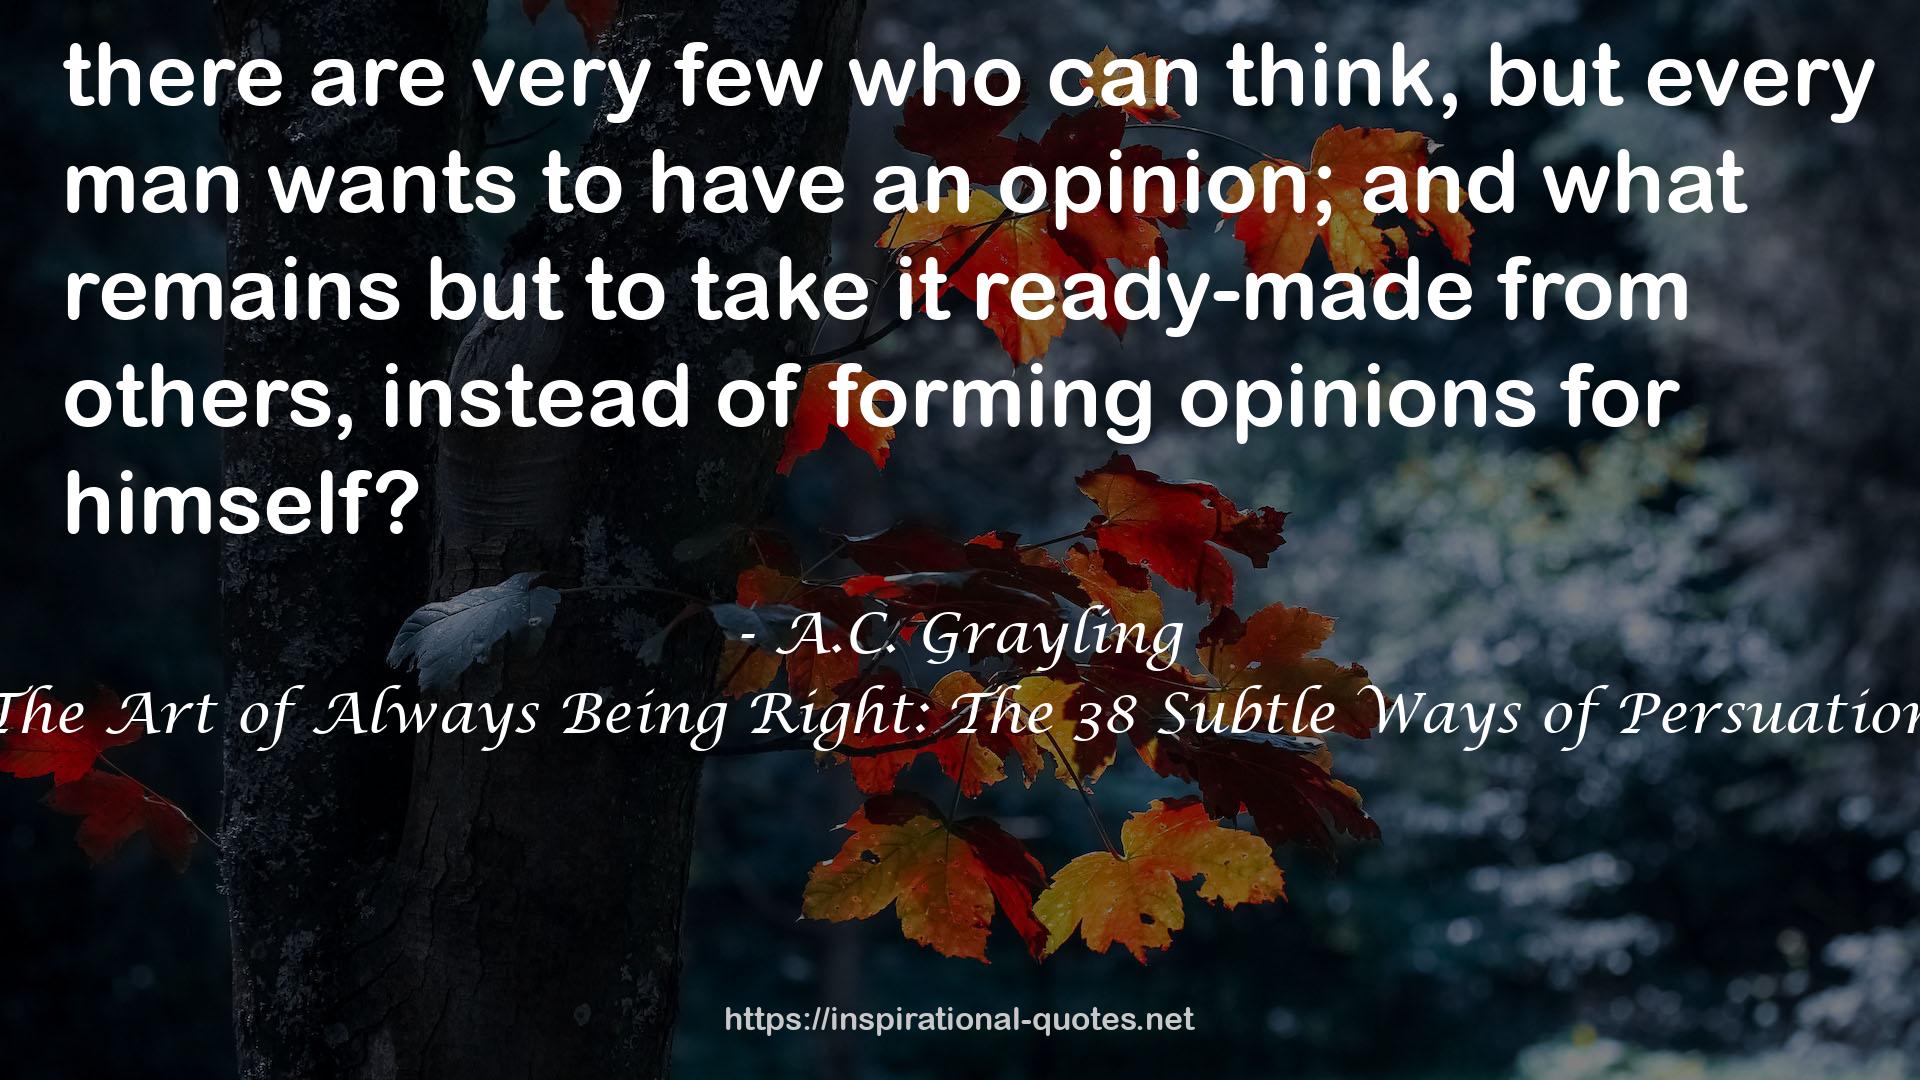 The Art of Always Being Right: The 38 Subtle Ways of Persuation QUOTES